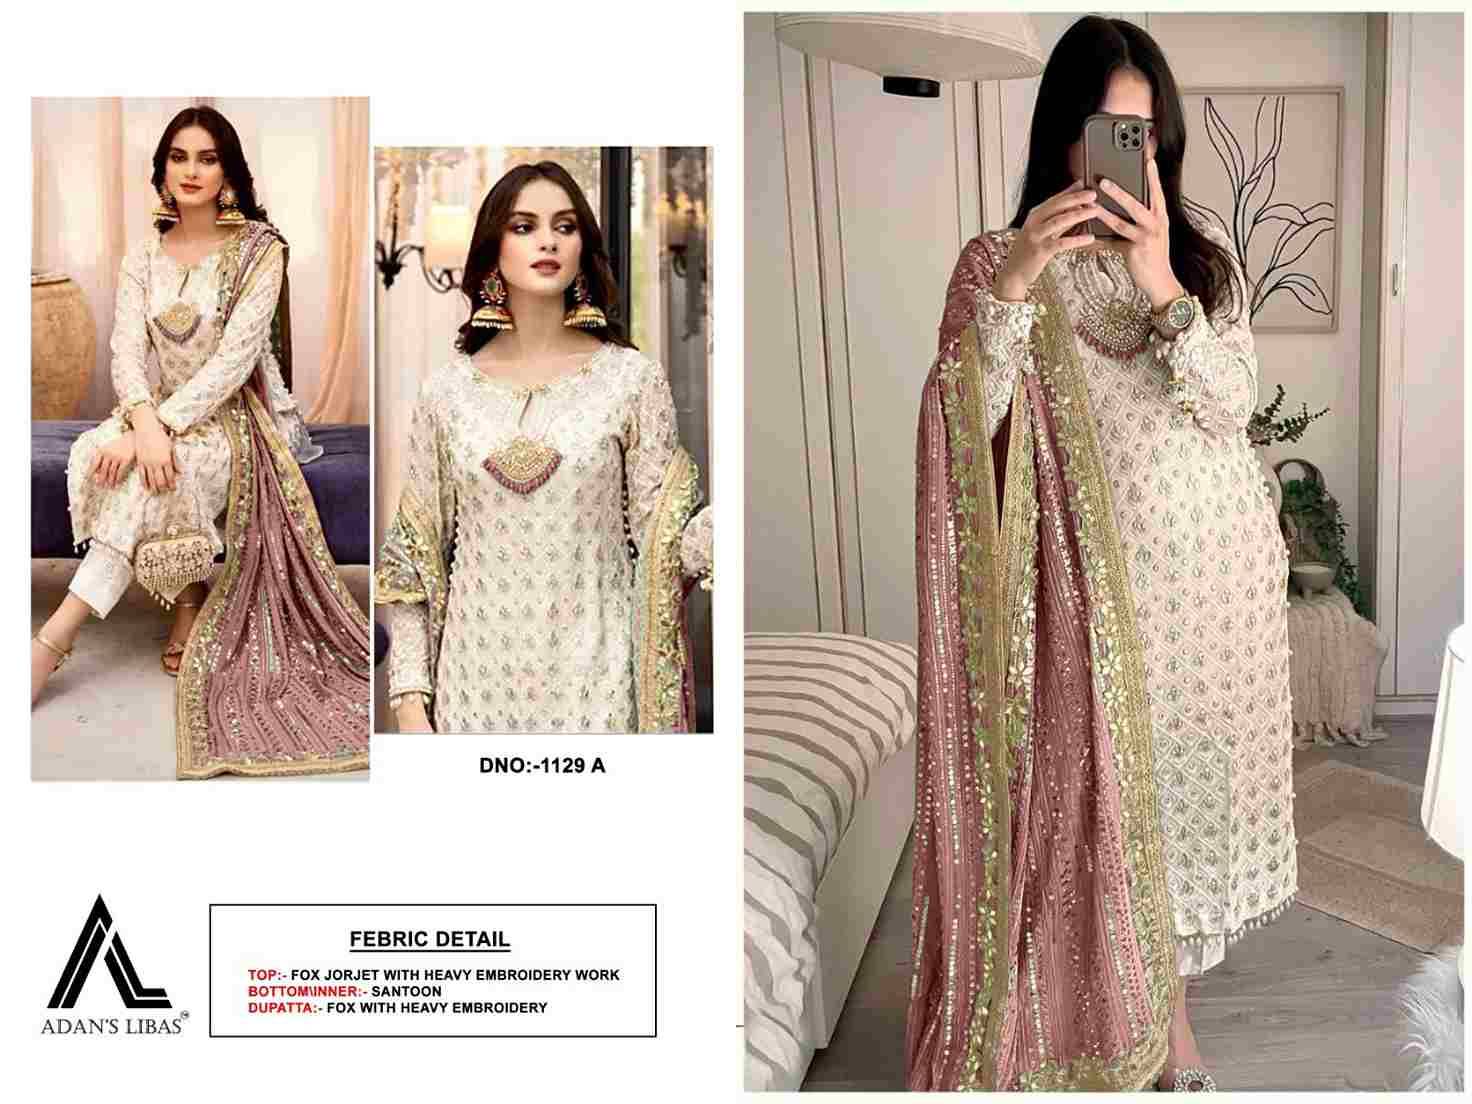 Adans Libas 1129 Colours By Adans Libas 1129-A To 1129-D Series Beautiful Pakistani Suits Colorful Stylish Fancy Casual Wear & Ethnic Wear Faux Georgette Embroidered Dresses At Wholesale Price